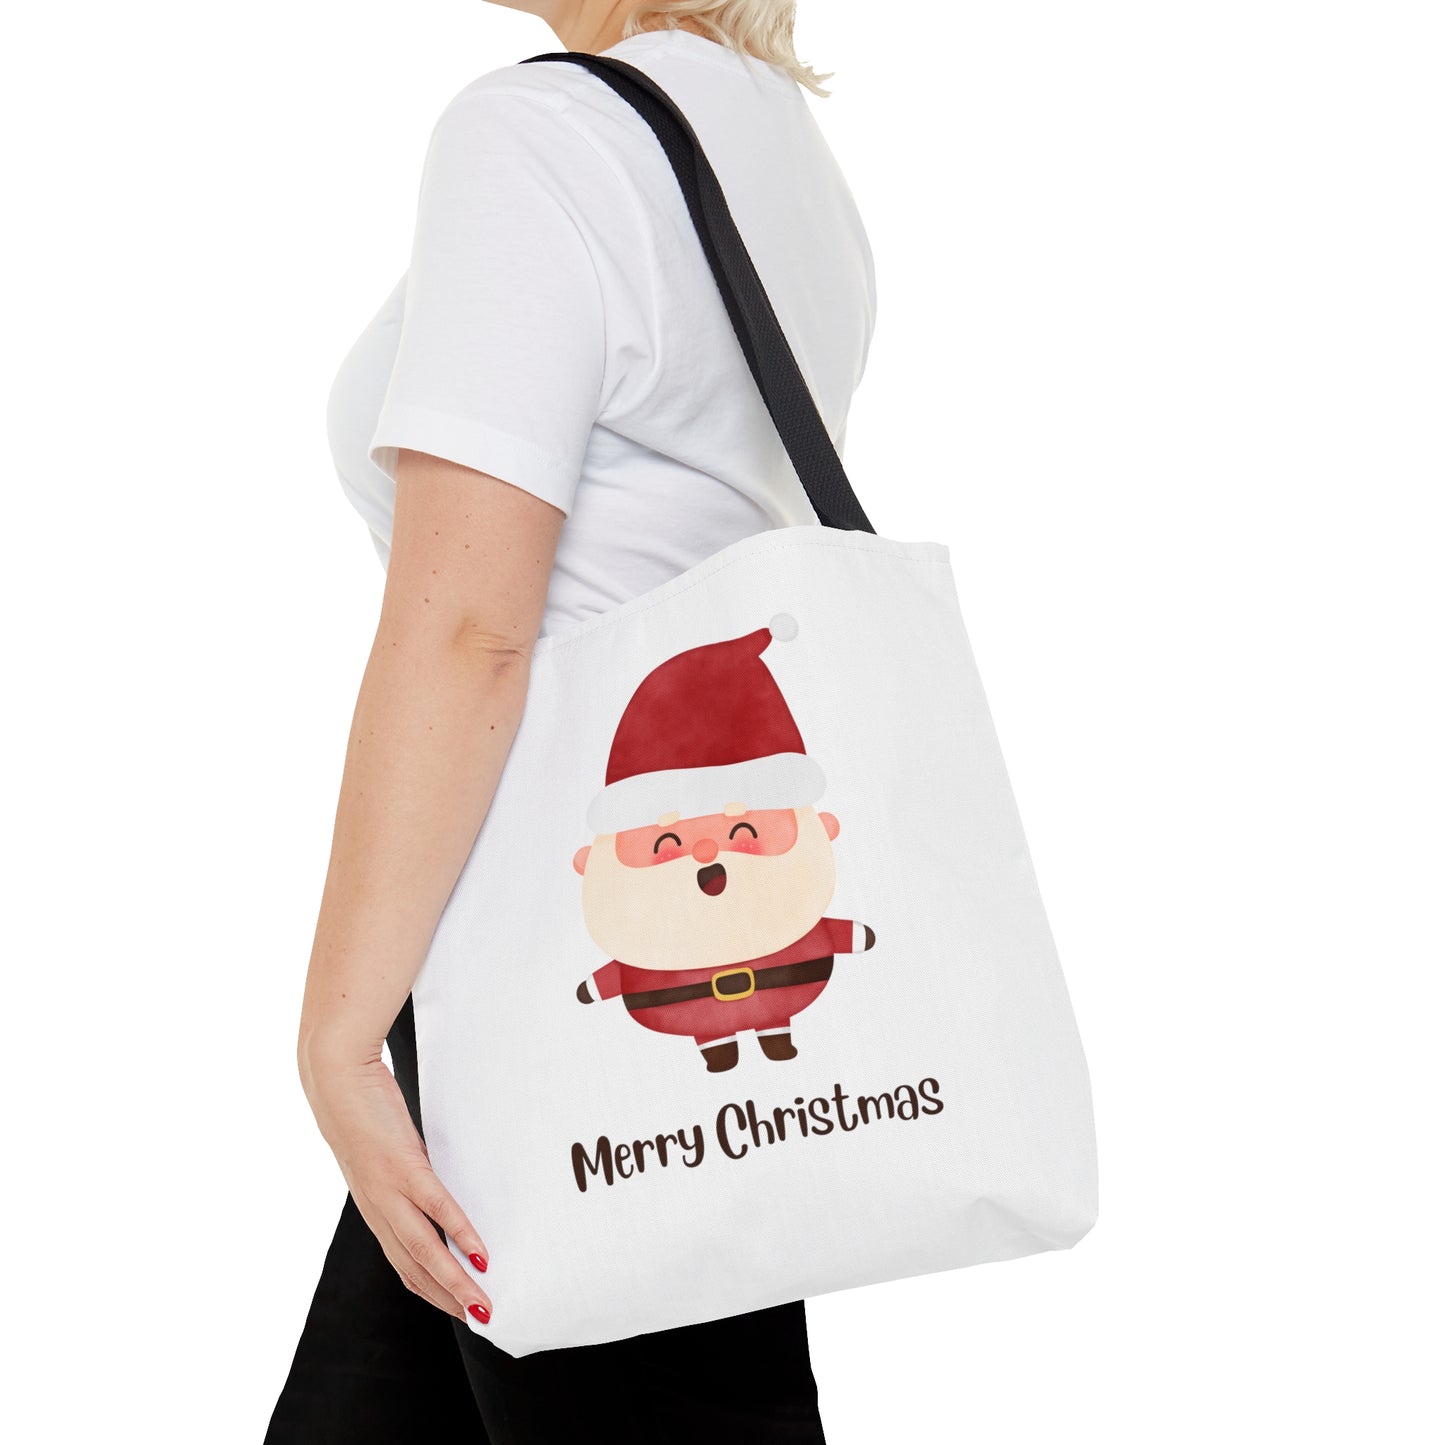 Merry Christmas with Santa Printed Tote Bags